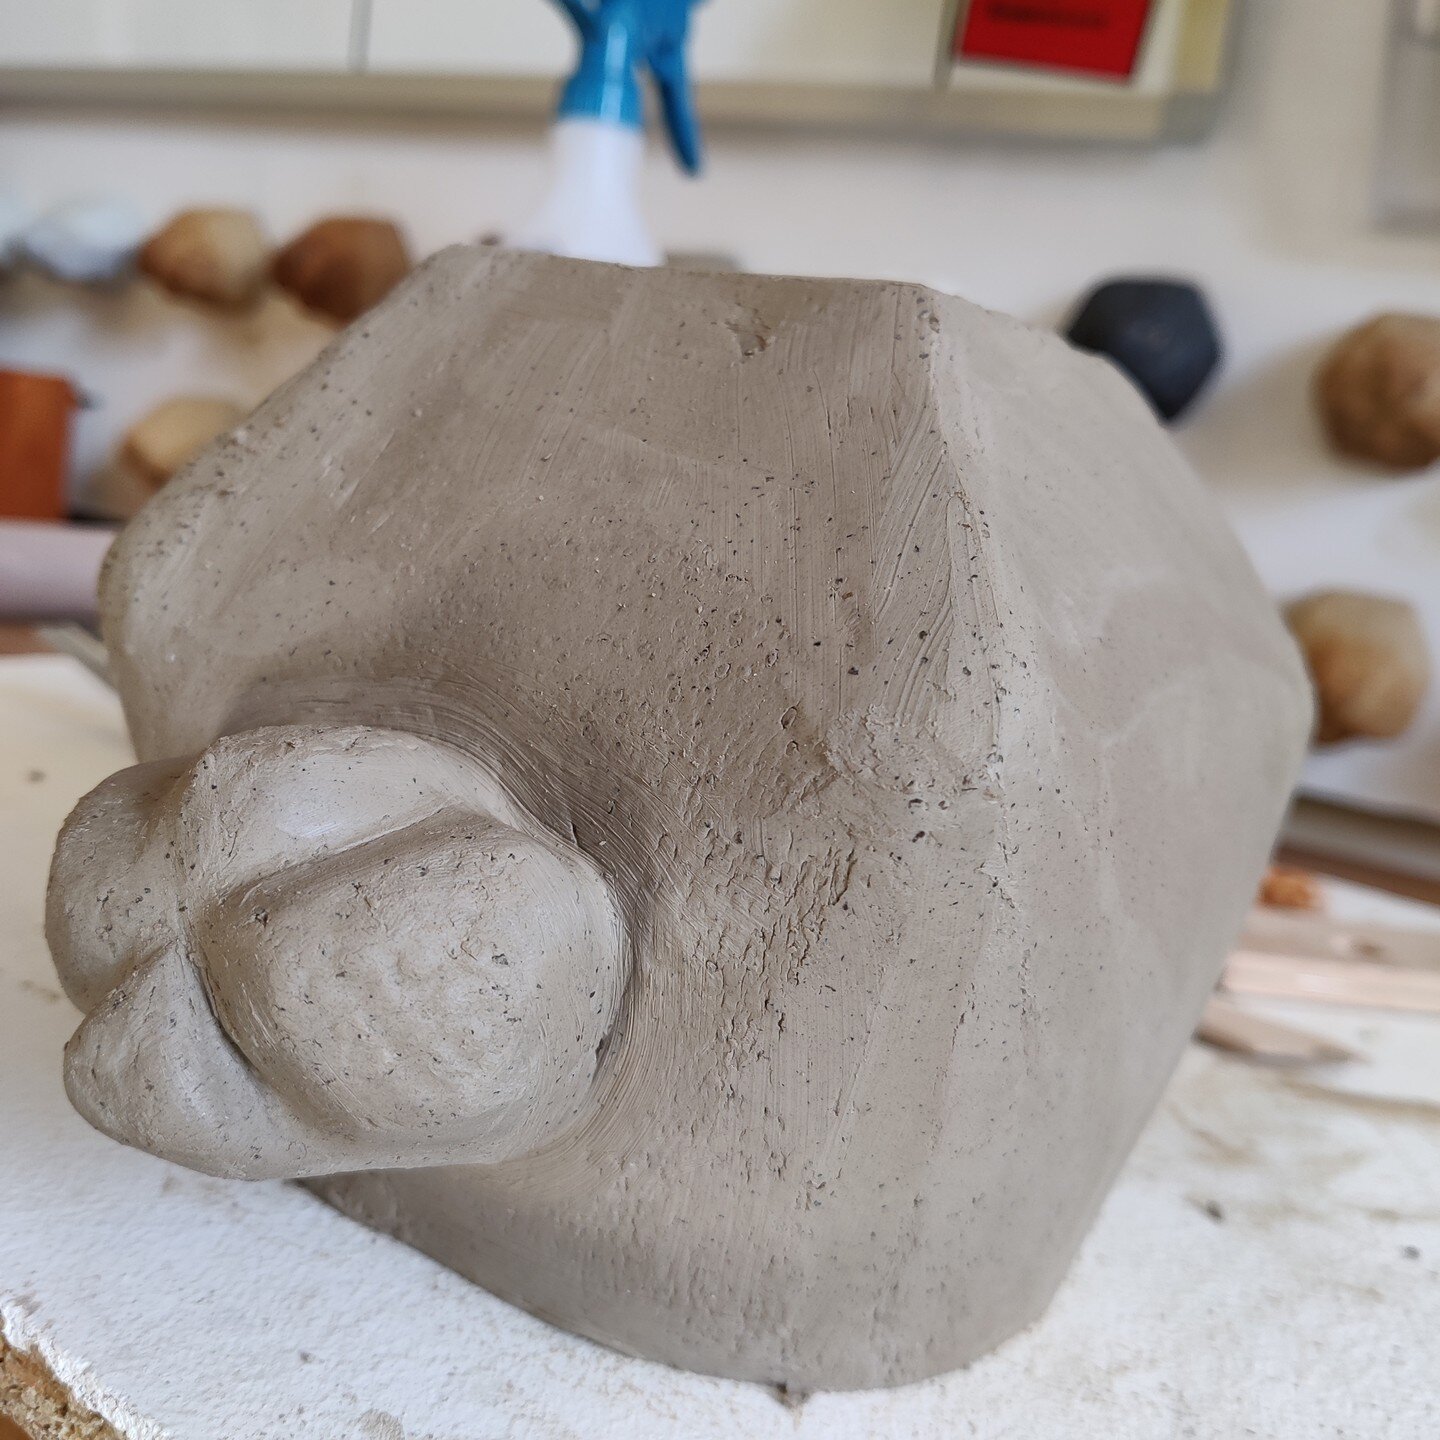 It's coming together, a little hard to tell whilst it's upsidedown. Just waiting for it to leather hard so I can take back the outer layer of clay with a sponge to reveal the crank below ready for drying. 

#rabbitpot #ptsd #artist #ceramasist #ceram